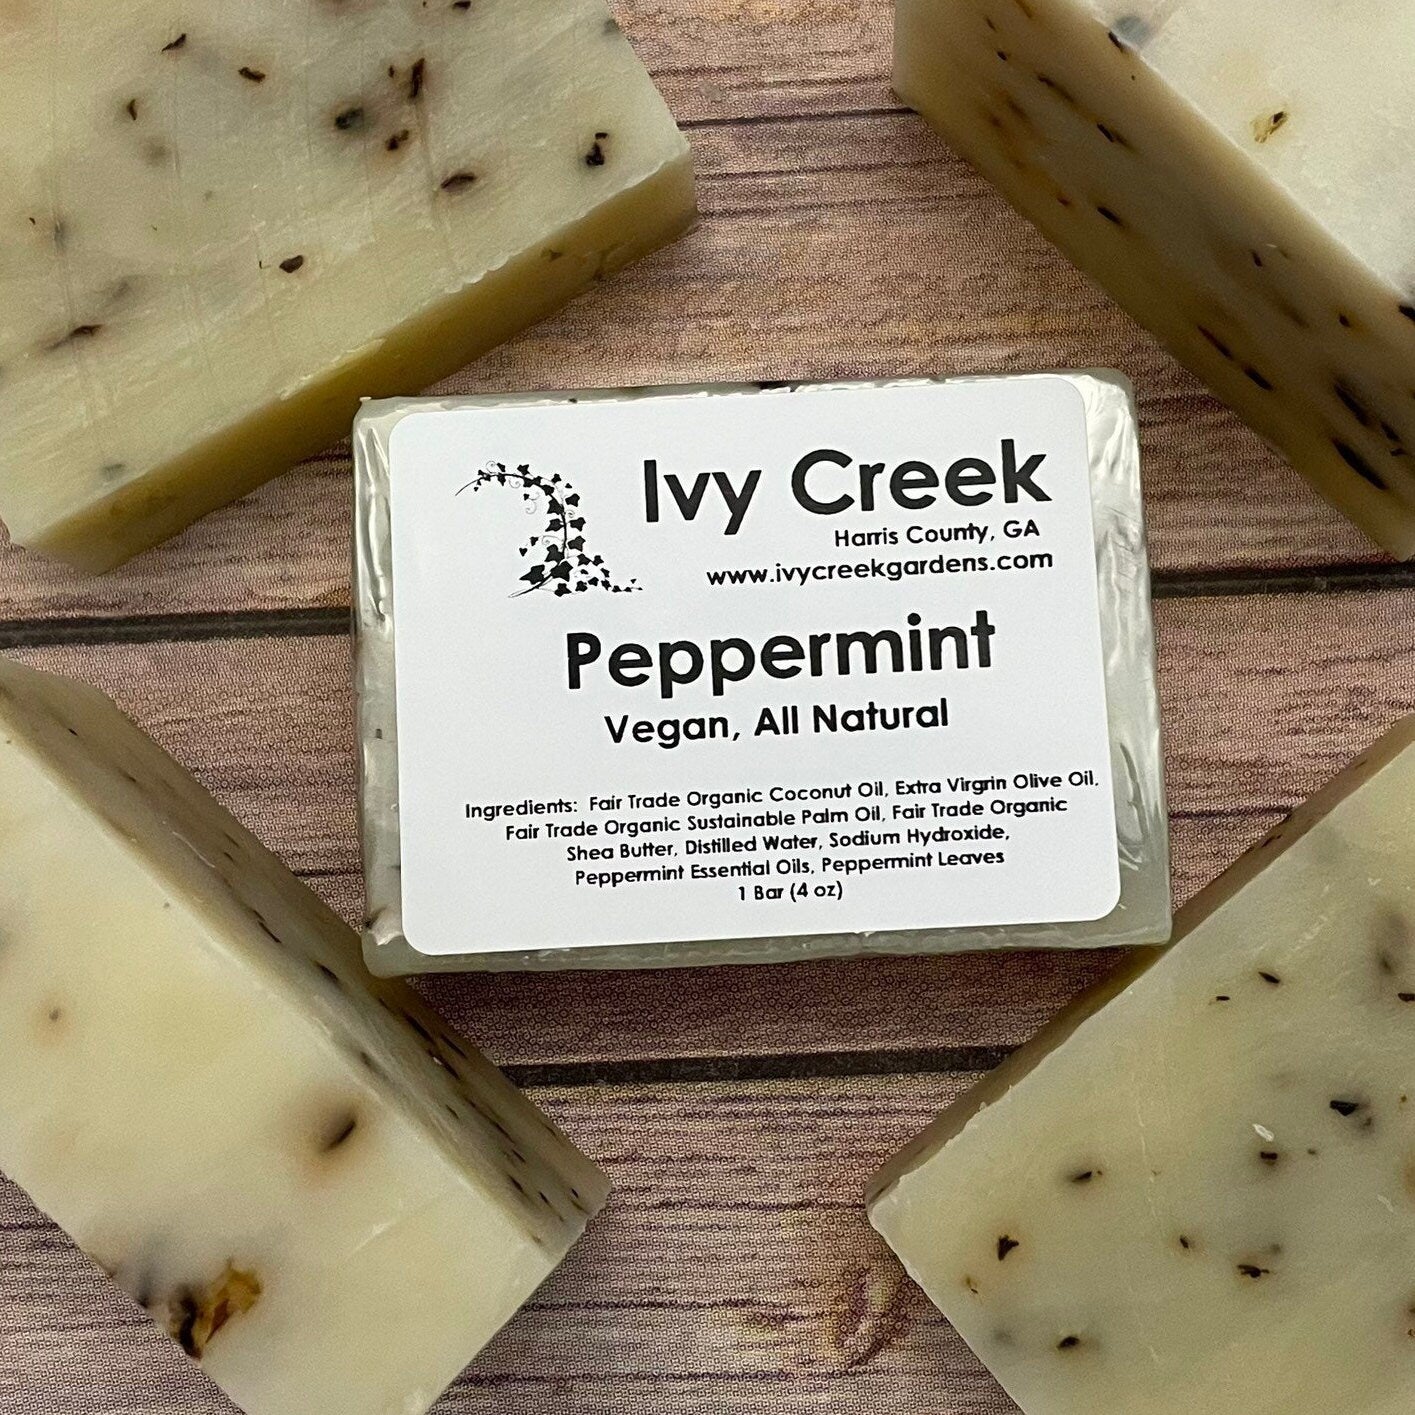 Ivy Creek Peppermint Vegan Soap | Natural, Holistic Soap for Her | Refreshing and Invigorating | Gifts for Mom | Fair Trade | 4 oz